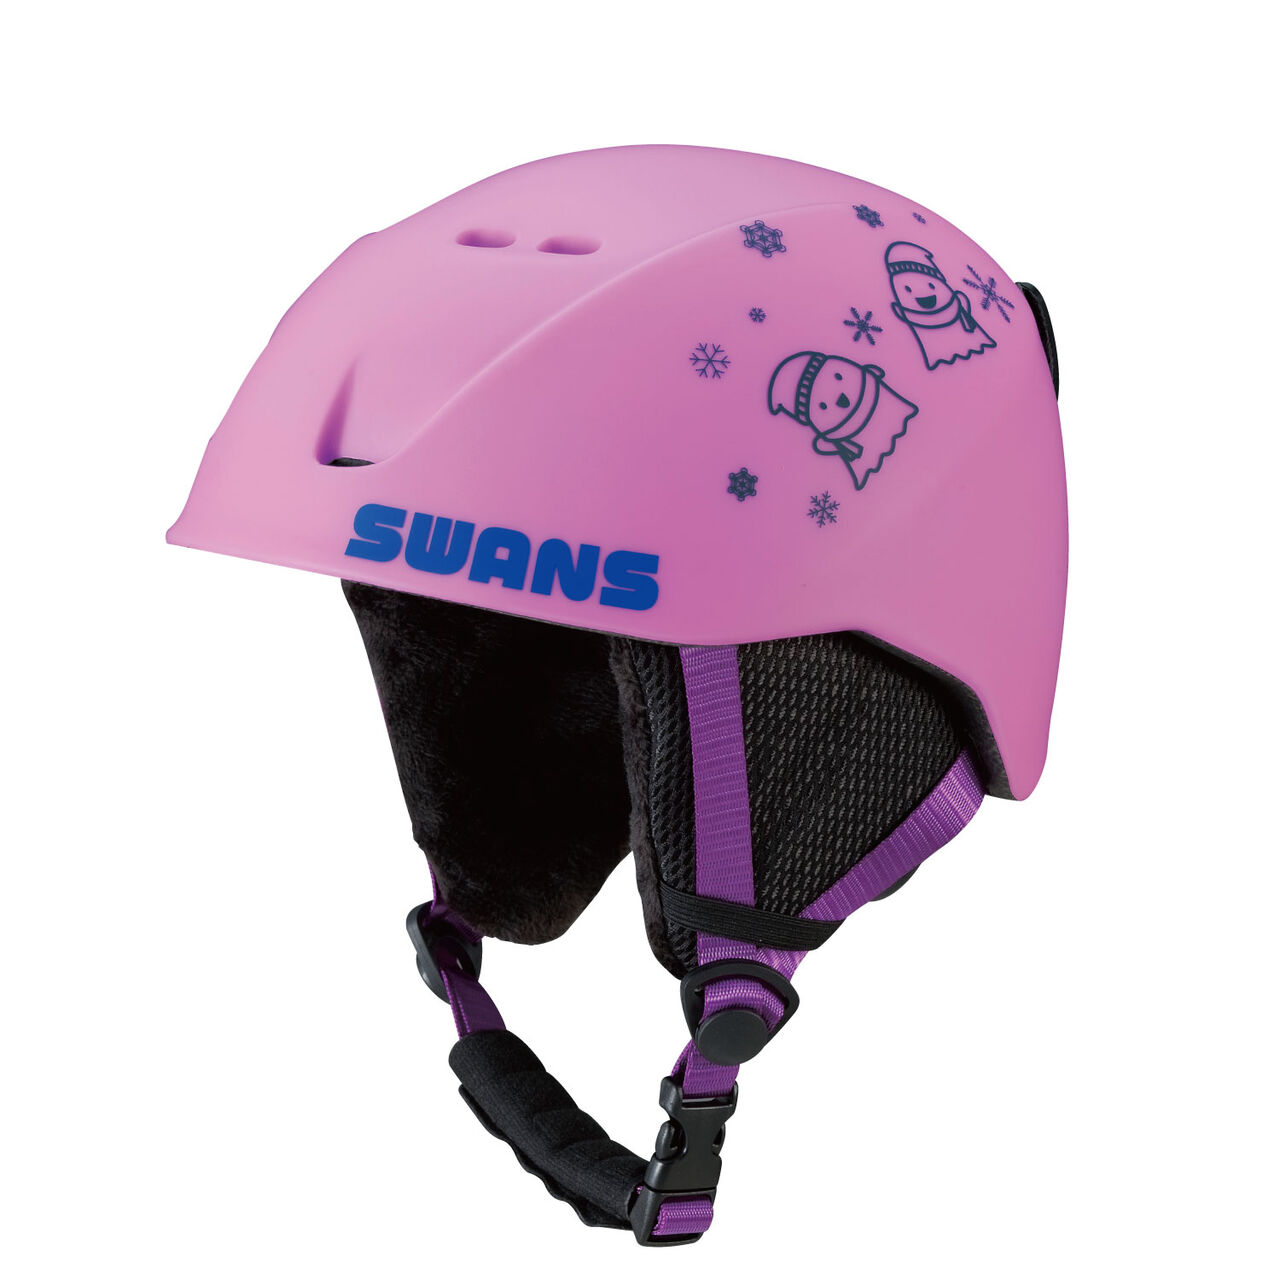 H-57 youth helmet Pink,Opt1, large image number 0